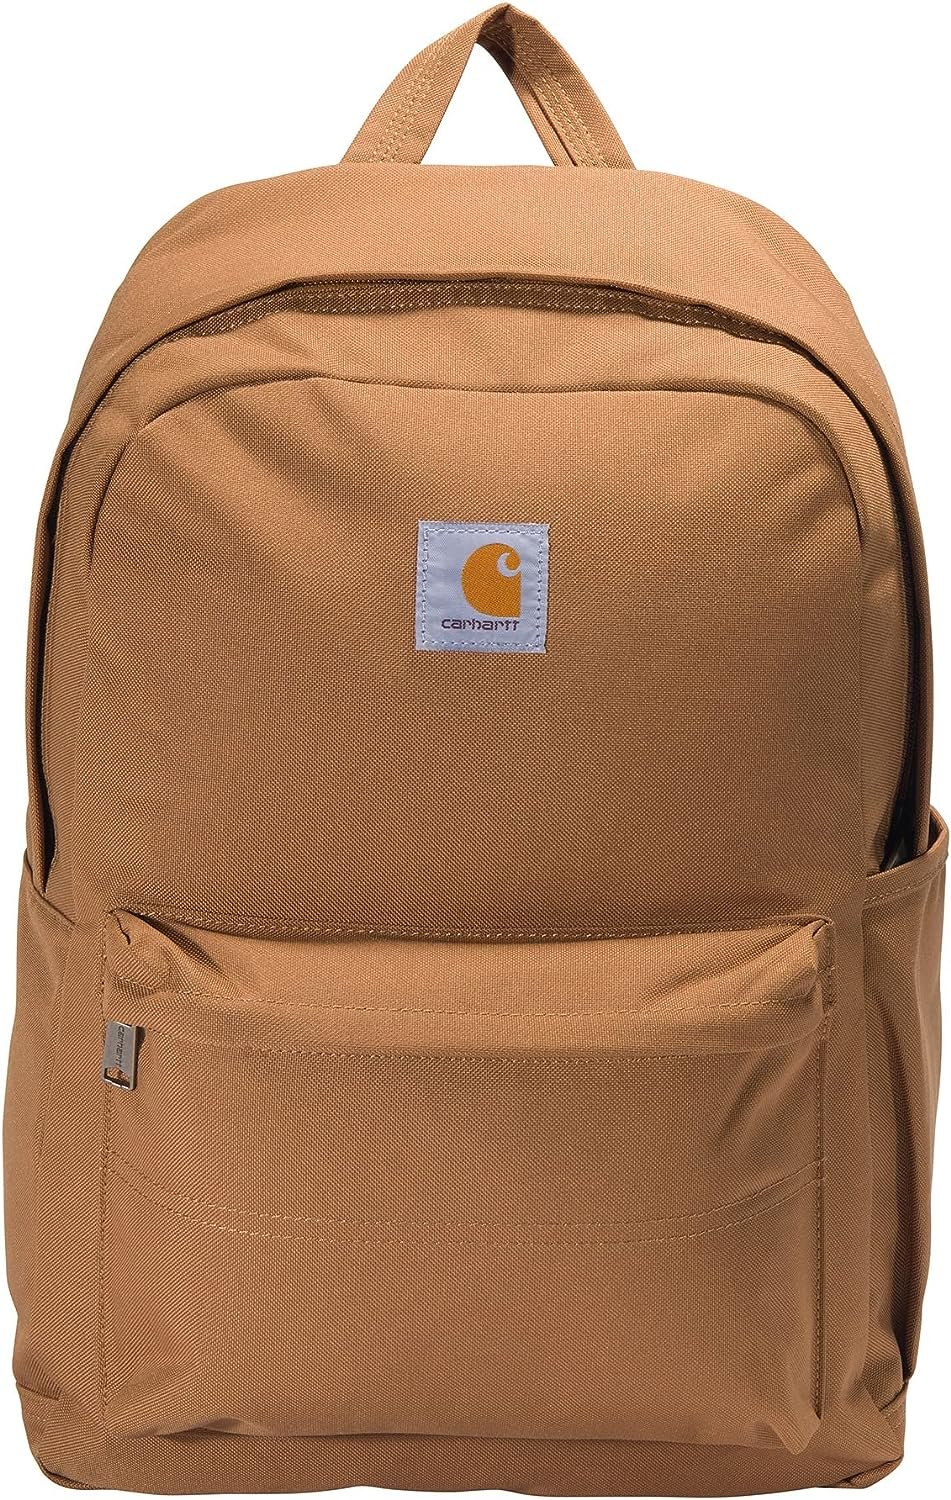 Carhartt 21 L Essential Laptop Backpack Review